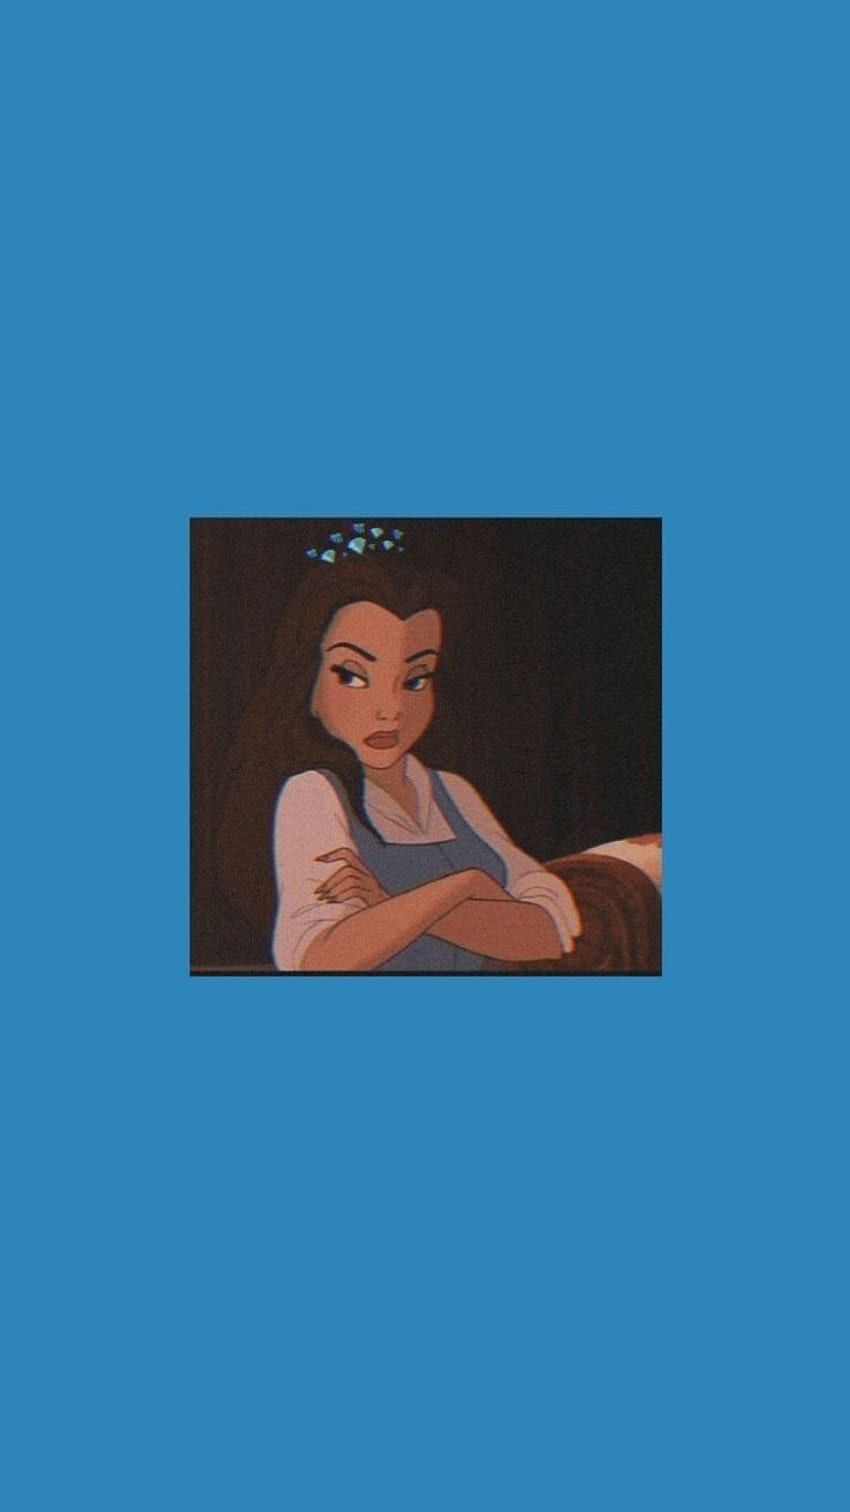 A cartoon character with long hair is sitting on the couch - Belle